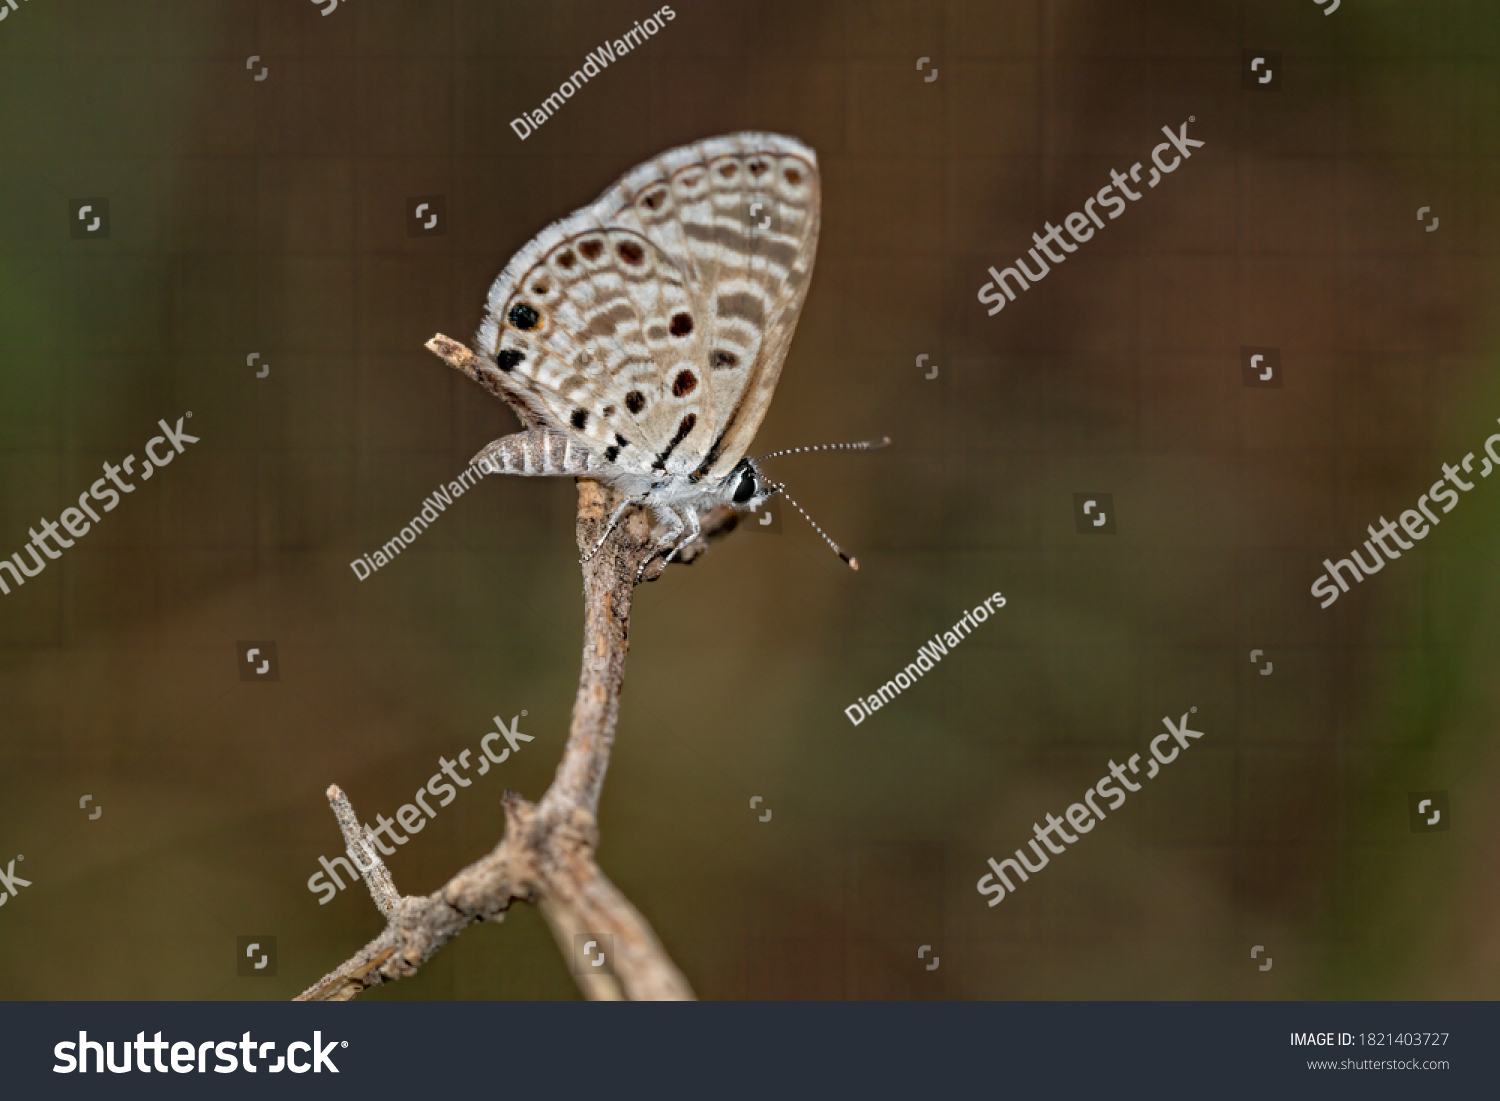 Azanus jesous, the African babul blue or topaz-spotted blue, is a small butterfly found in Africa, Egypt, Syria, India, Sri Lanka and Myanmar that belongs to the lycaenids or blues family. #1821403727